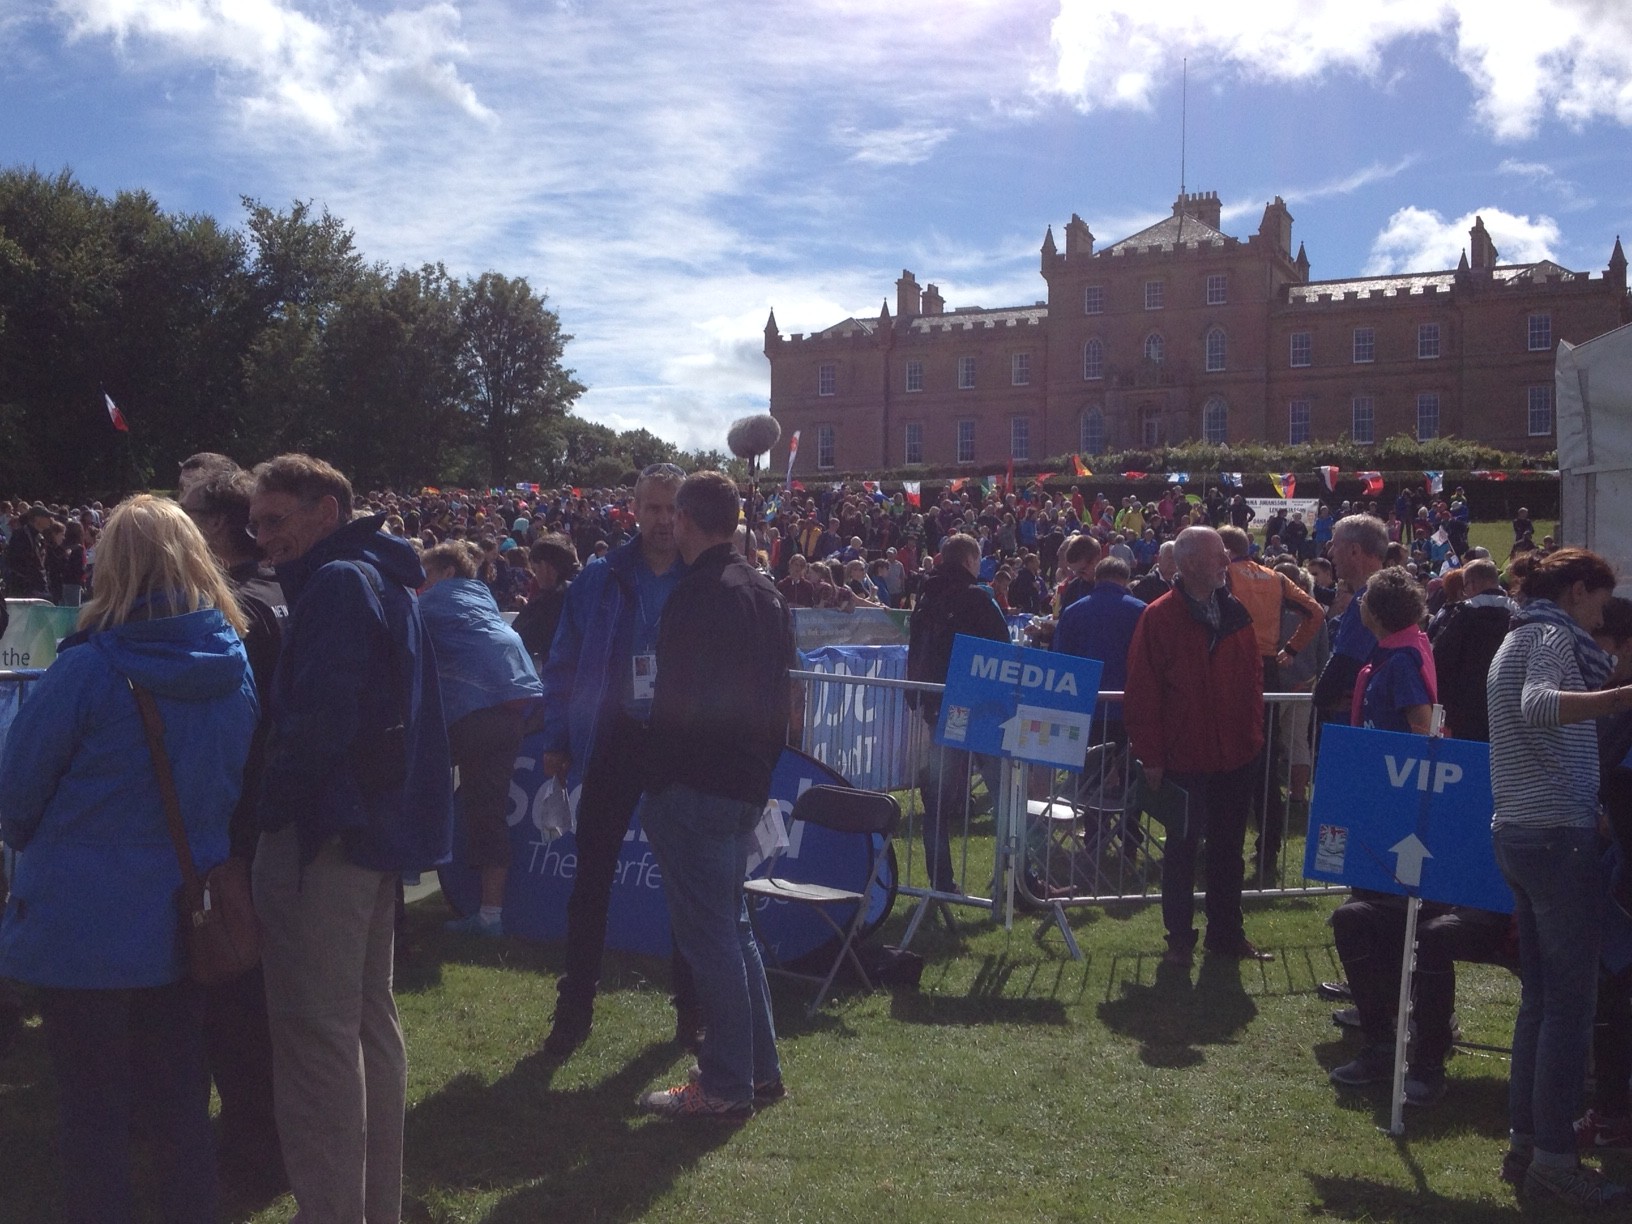 Crowds getting ready to watch the Relay in front of Darnaway Castle, Moray